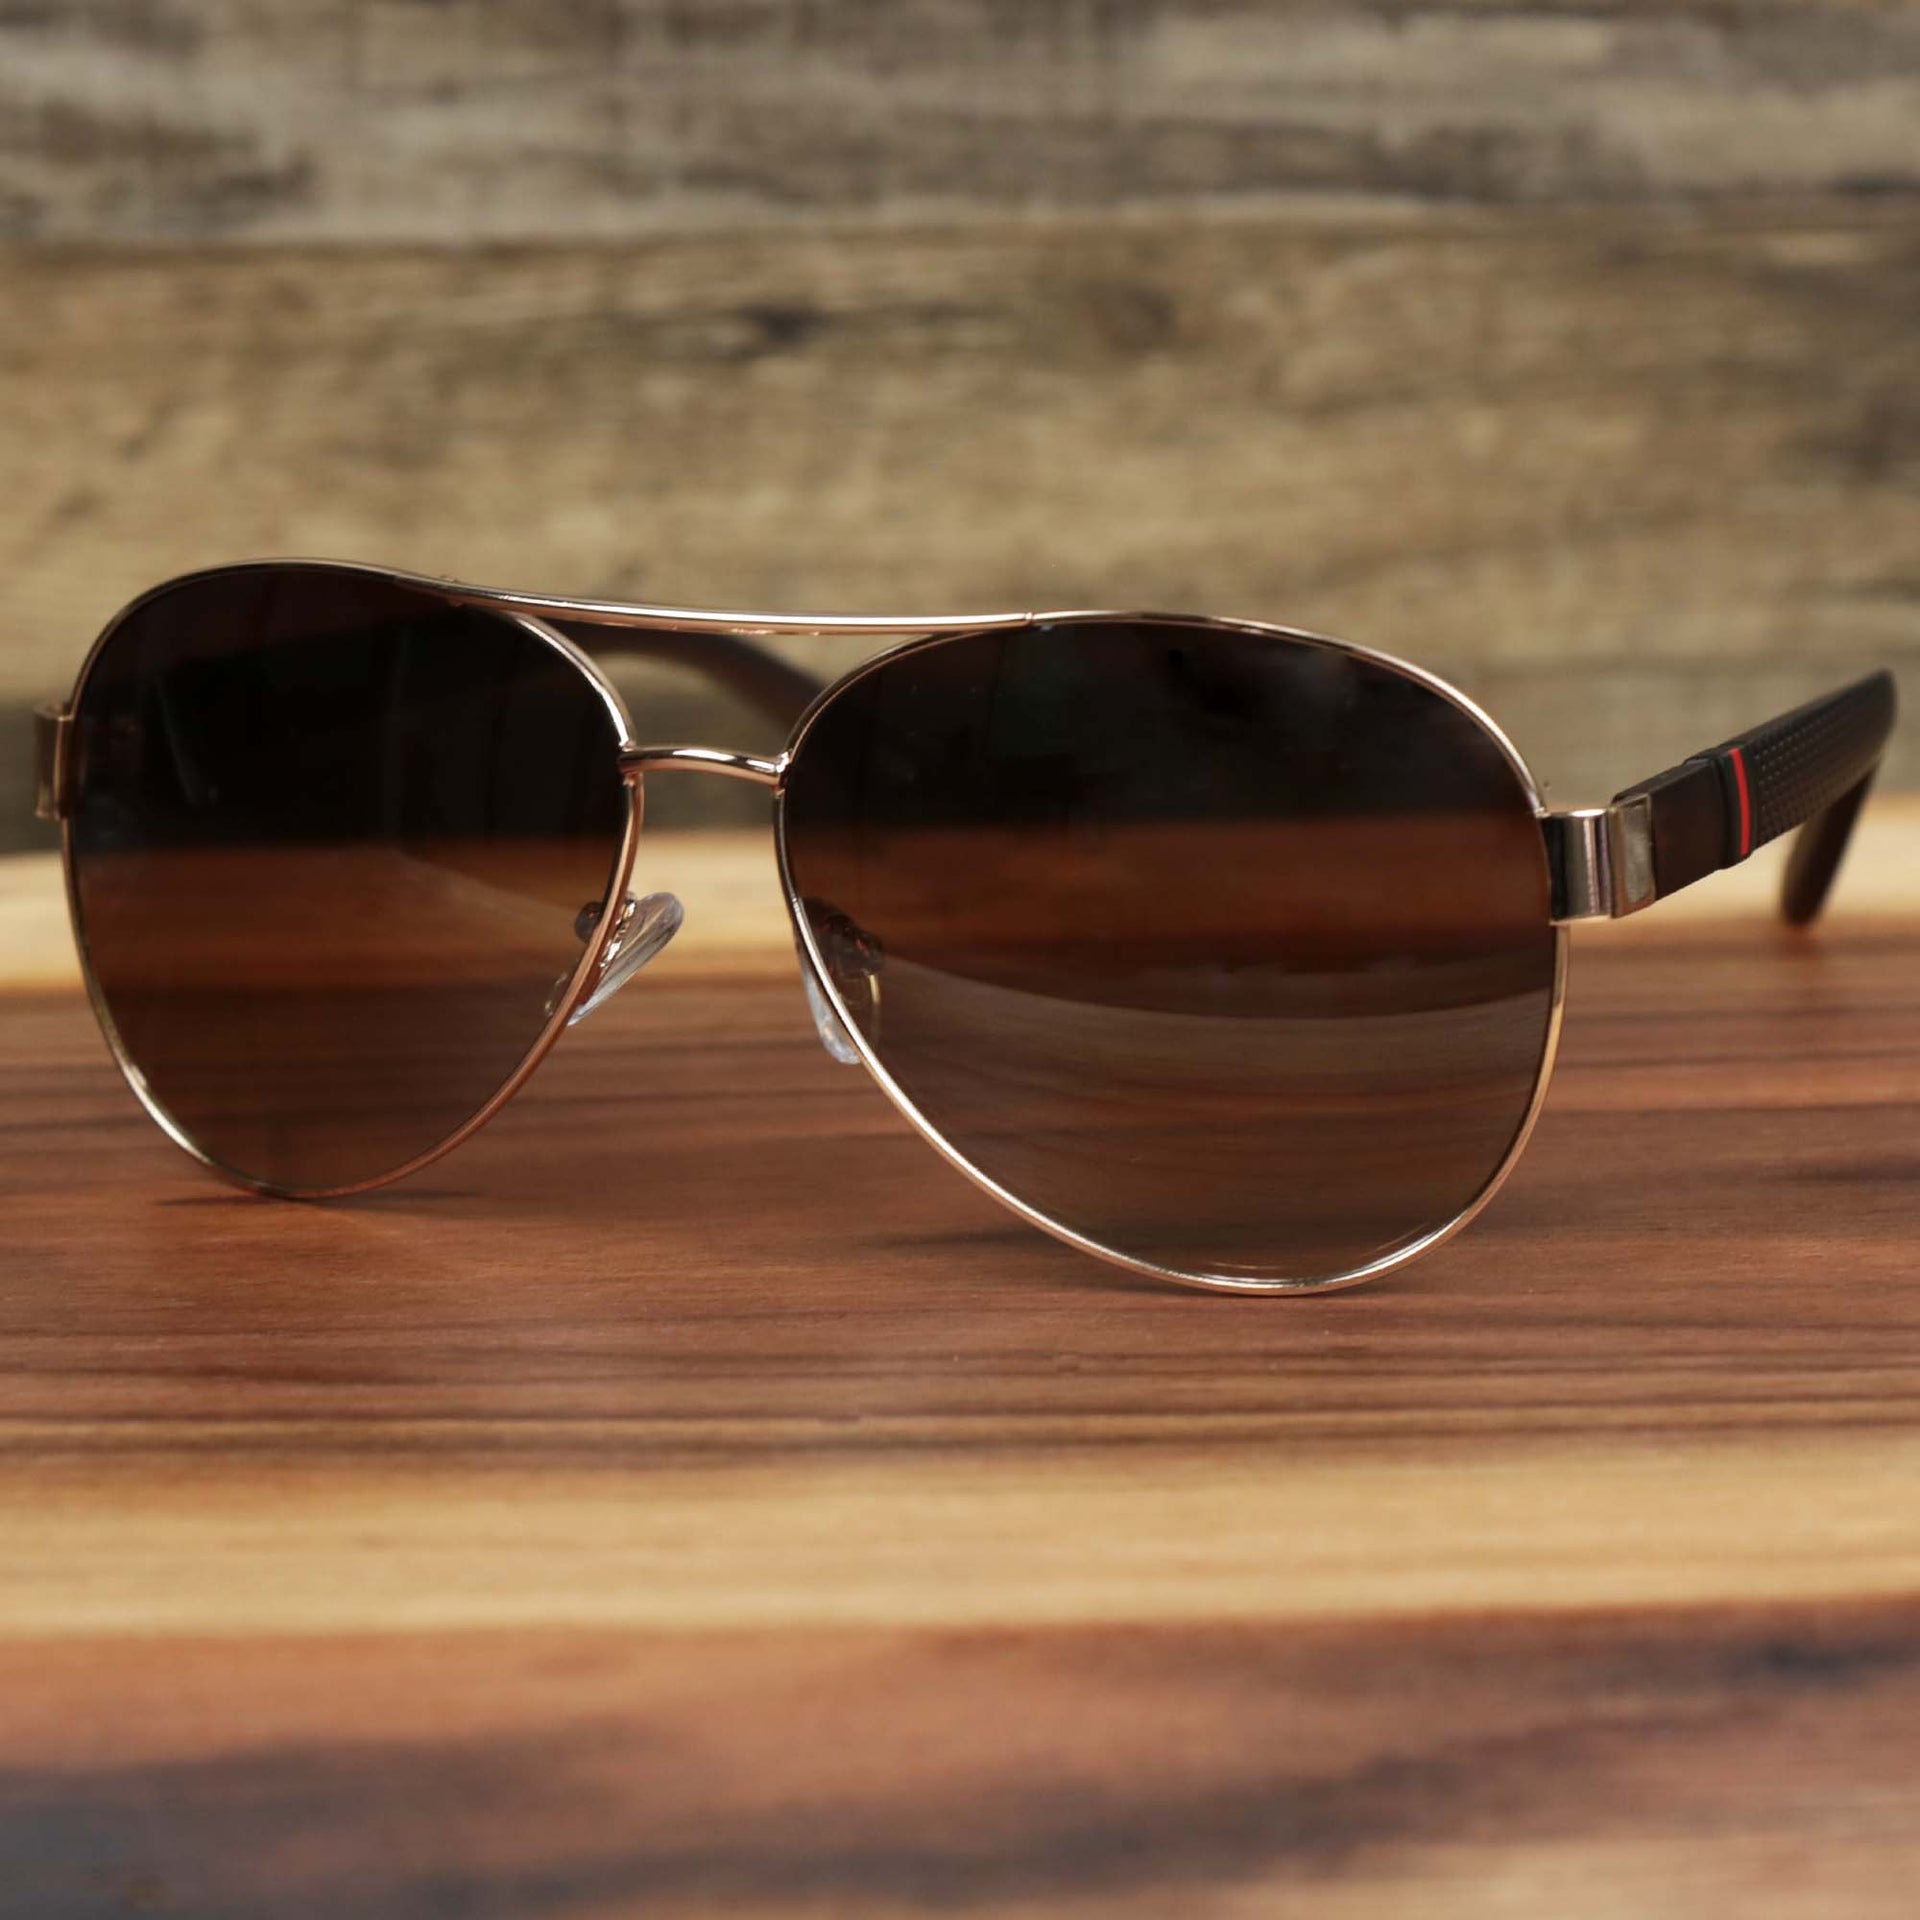 The Aviator Frame Racing Stripes Brown Lens Sunglasses with Rose Gold Frame